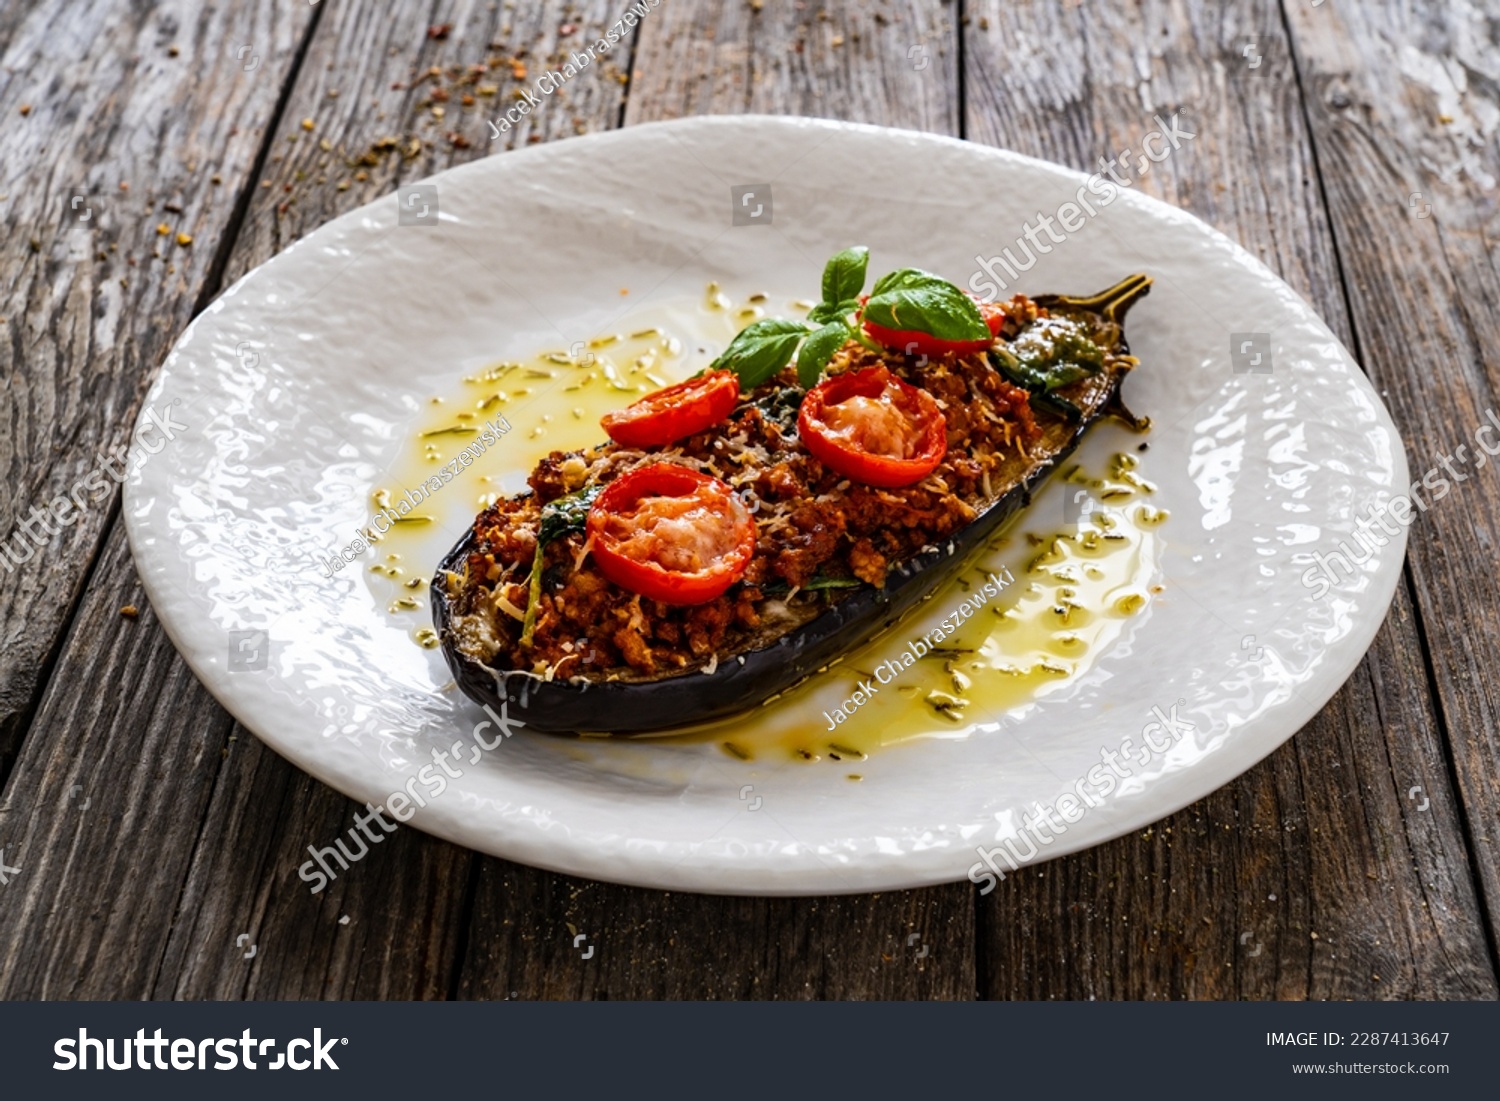 Roasted aubergine stuffed with minced meat and cheese on wooden table  #2287413647